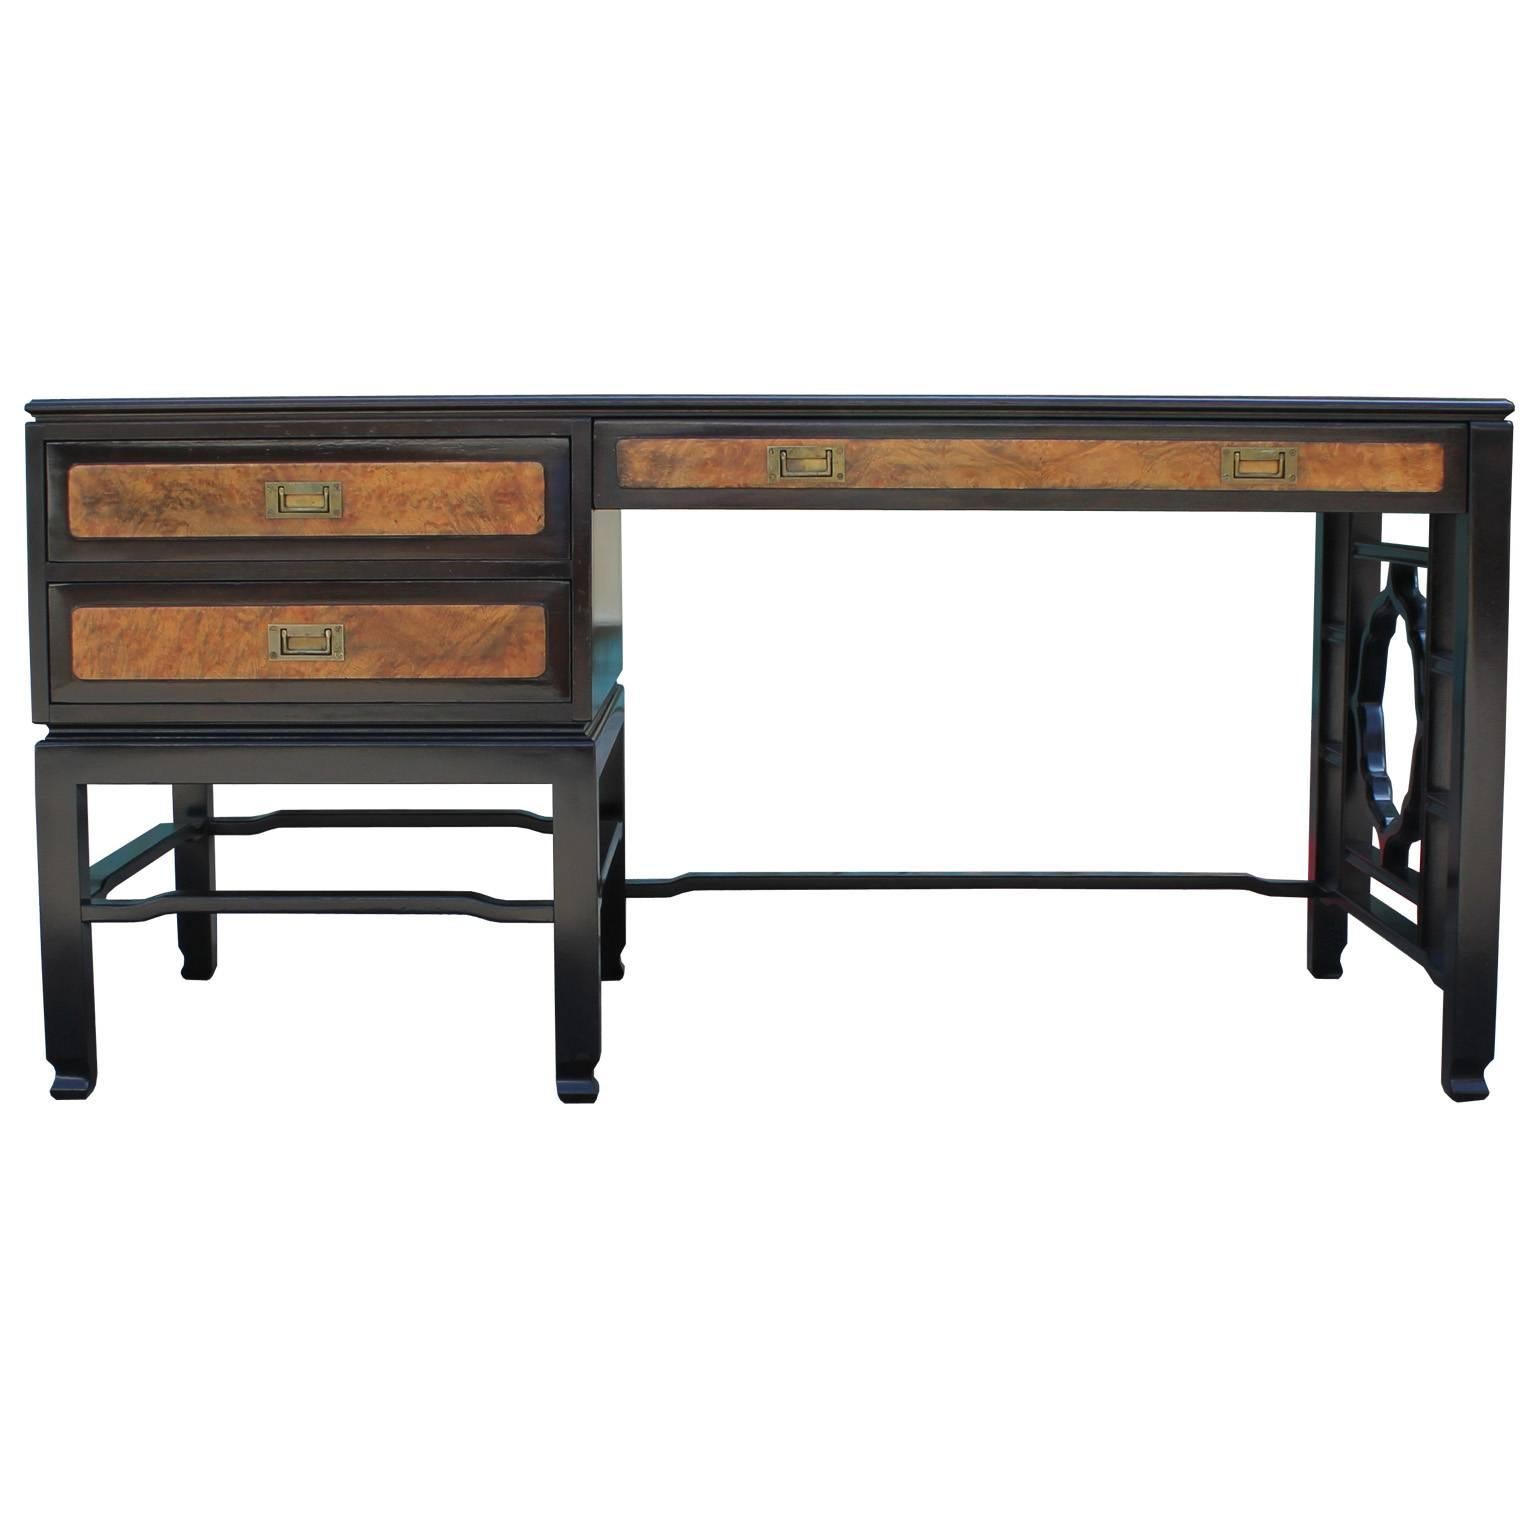 Excellent desk designed by John Widdicomb. Desk has wonderful lines with a beautiful trellis work leg. Desk is freshly finished in an ebony base and deep walnut body which nicely contrasts the burl wood accents. Brass campaign style hardware finish